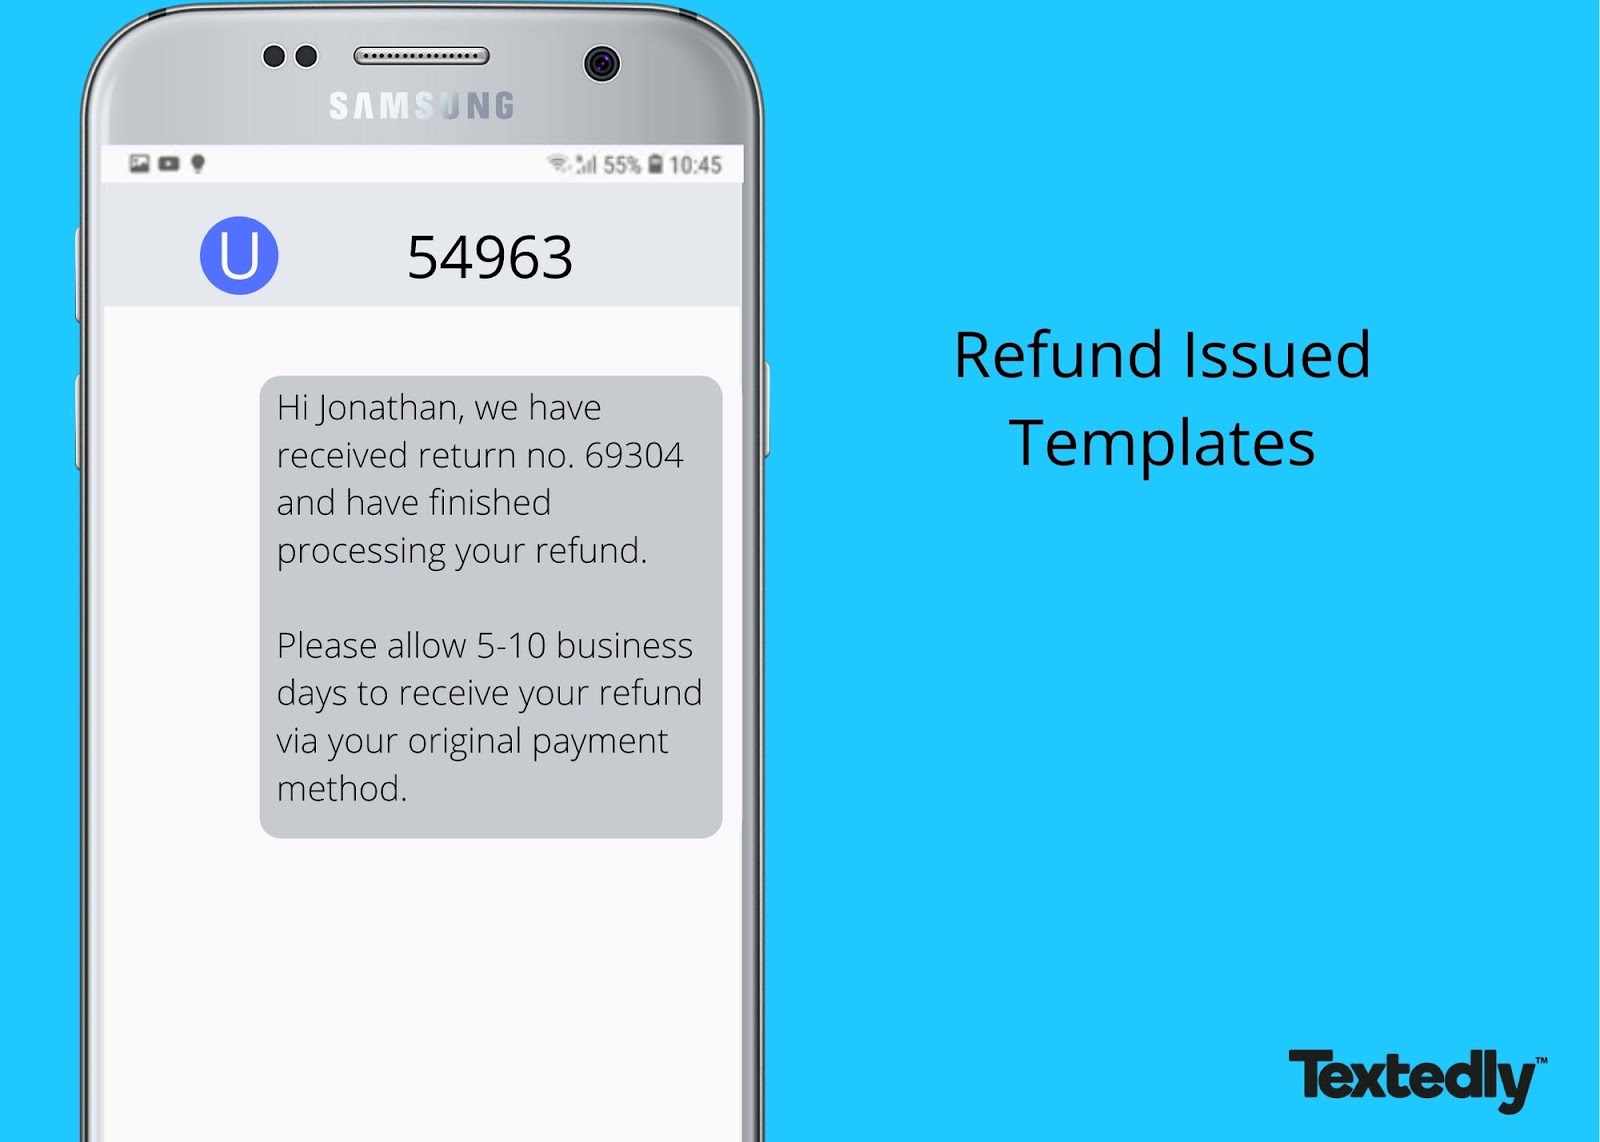 Refund issued SMS template